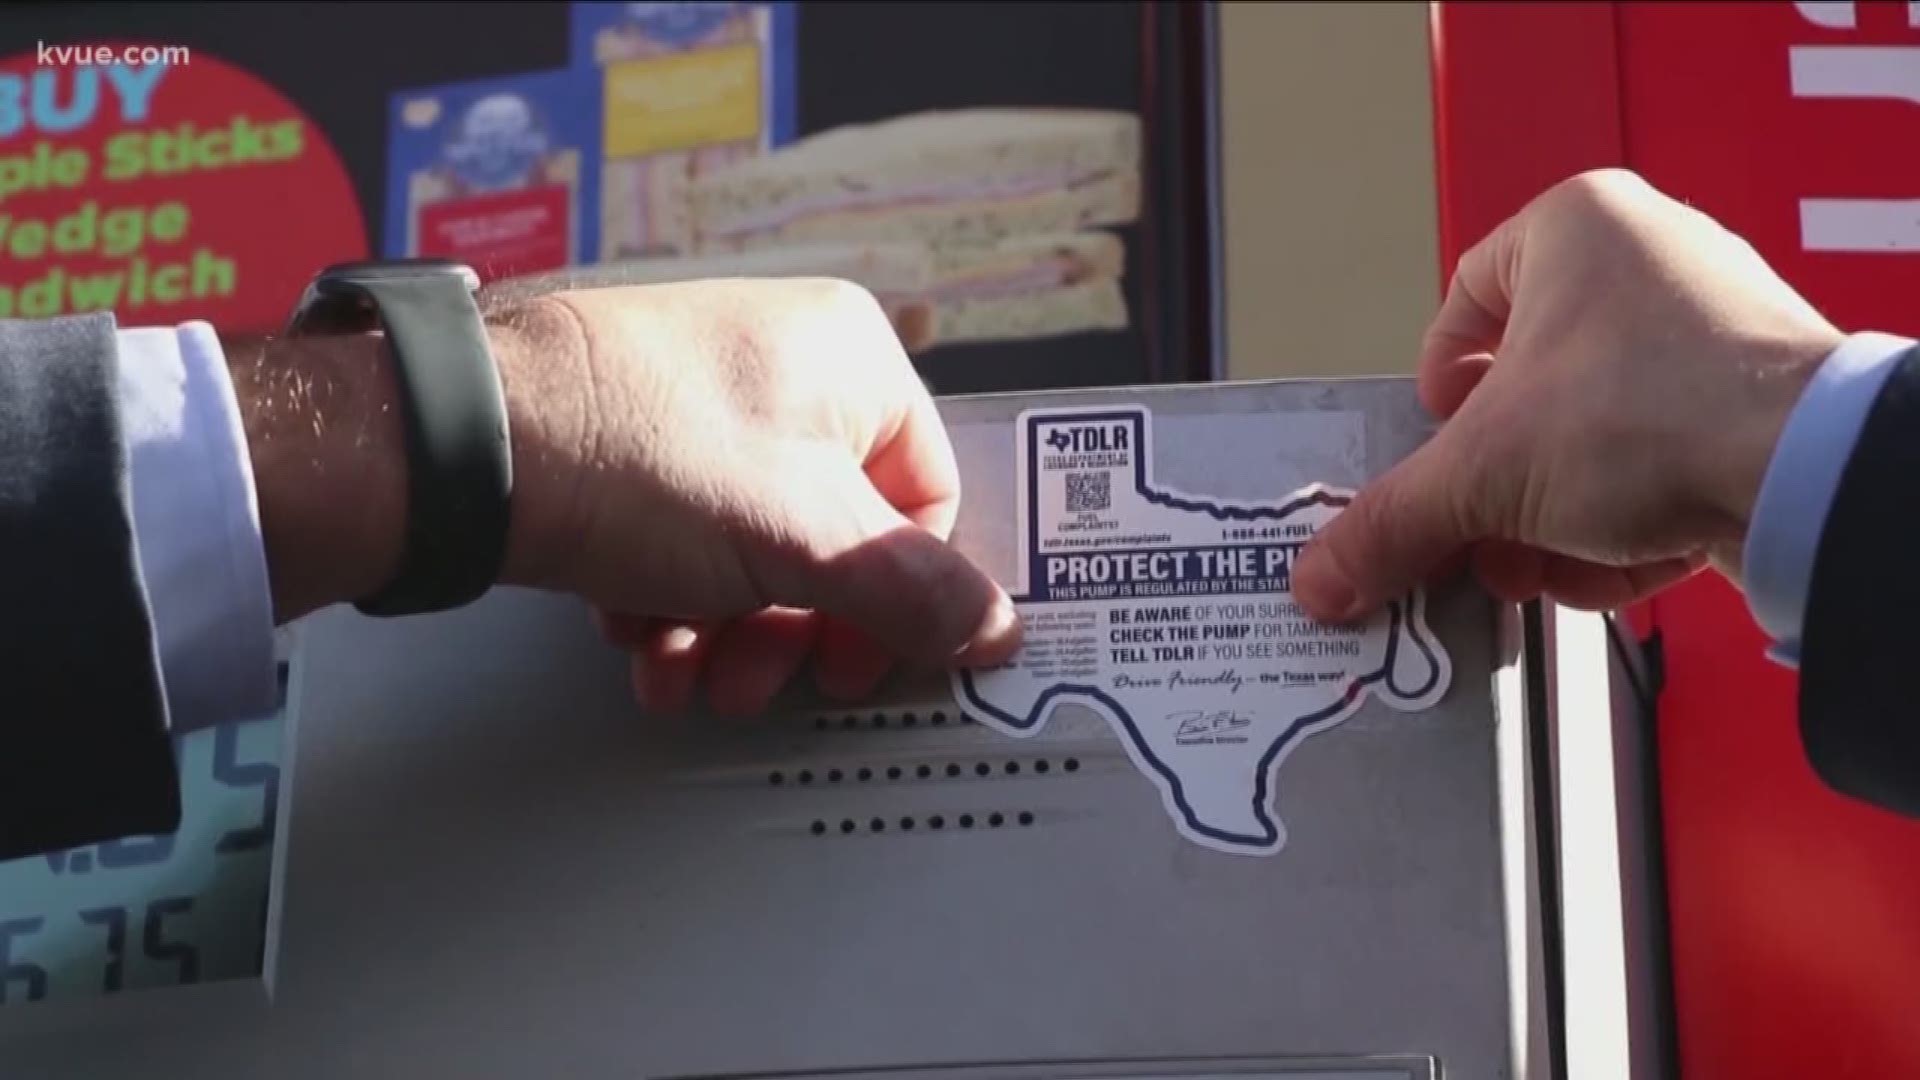 Shaped in the state of Texas, the stickers show you how to file a complaint about fuel quality, price or possible skimmers.